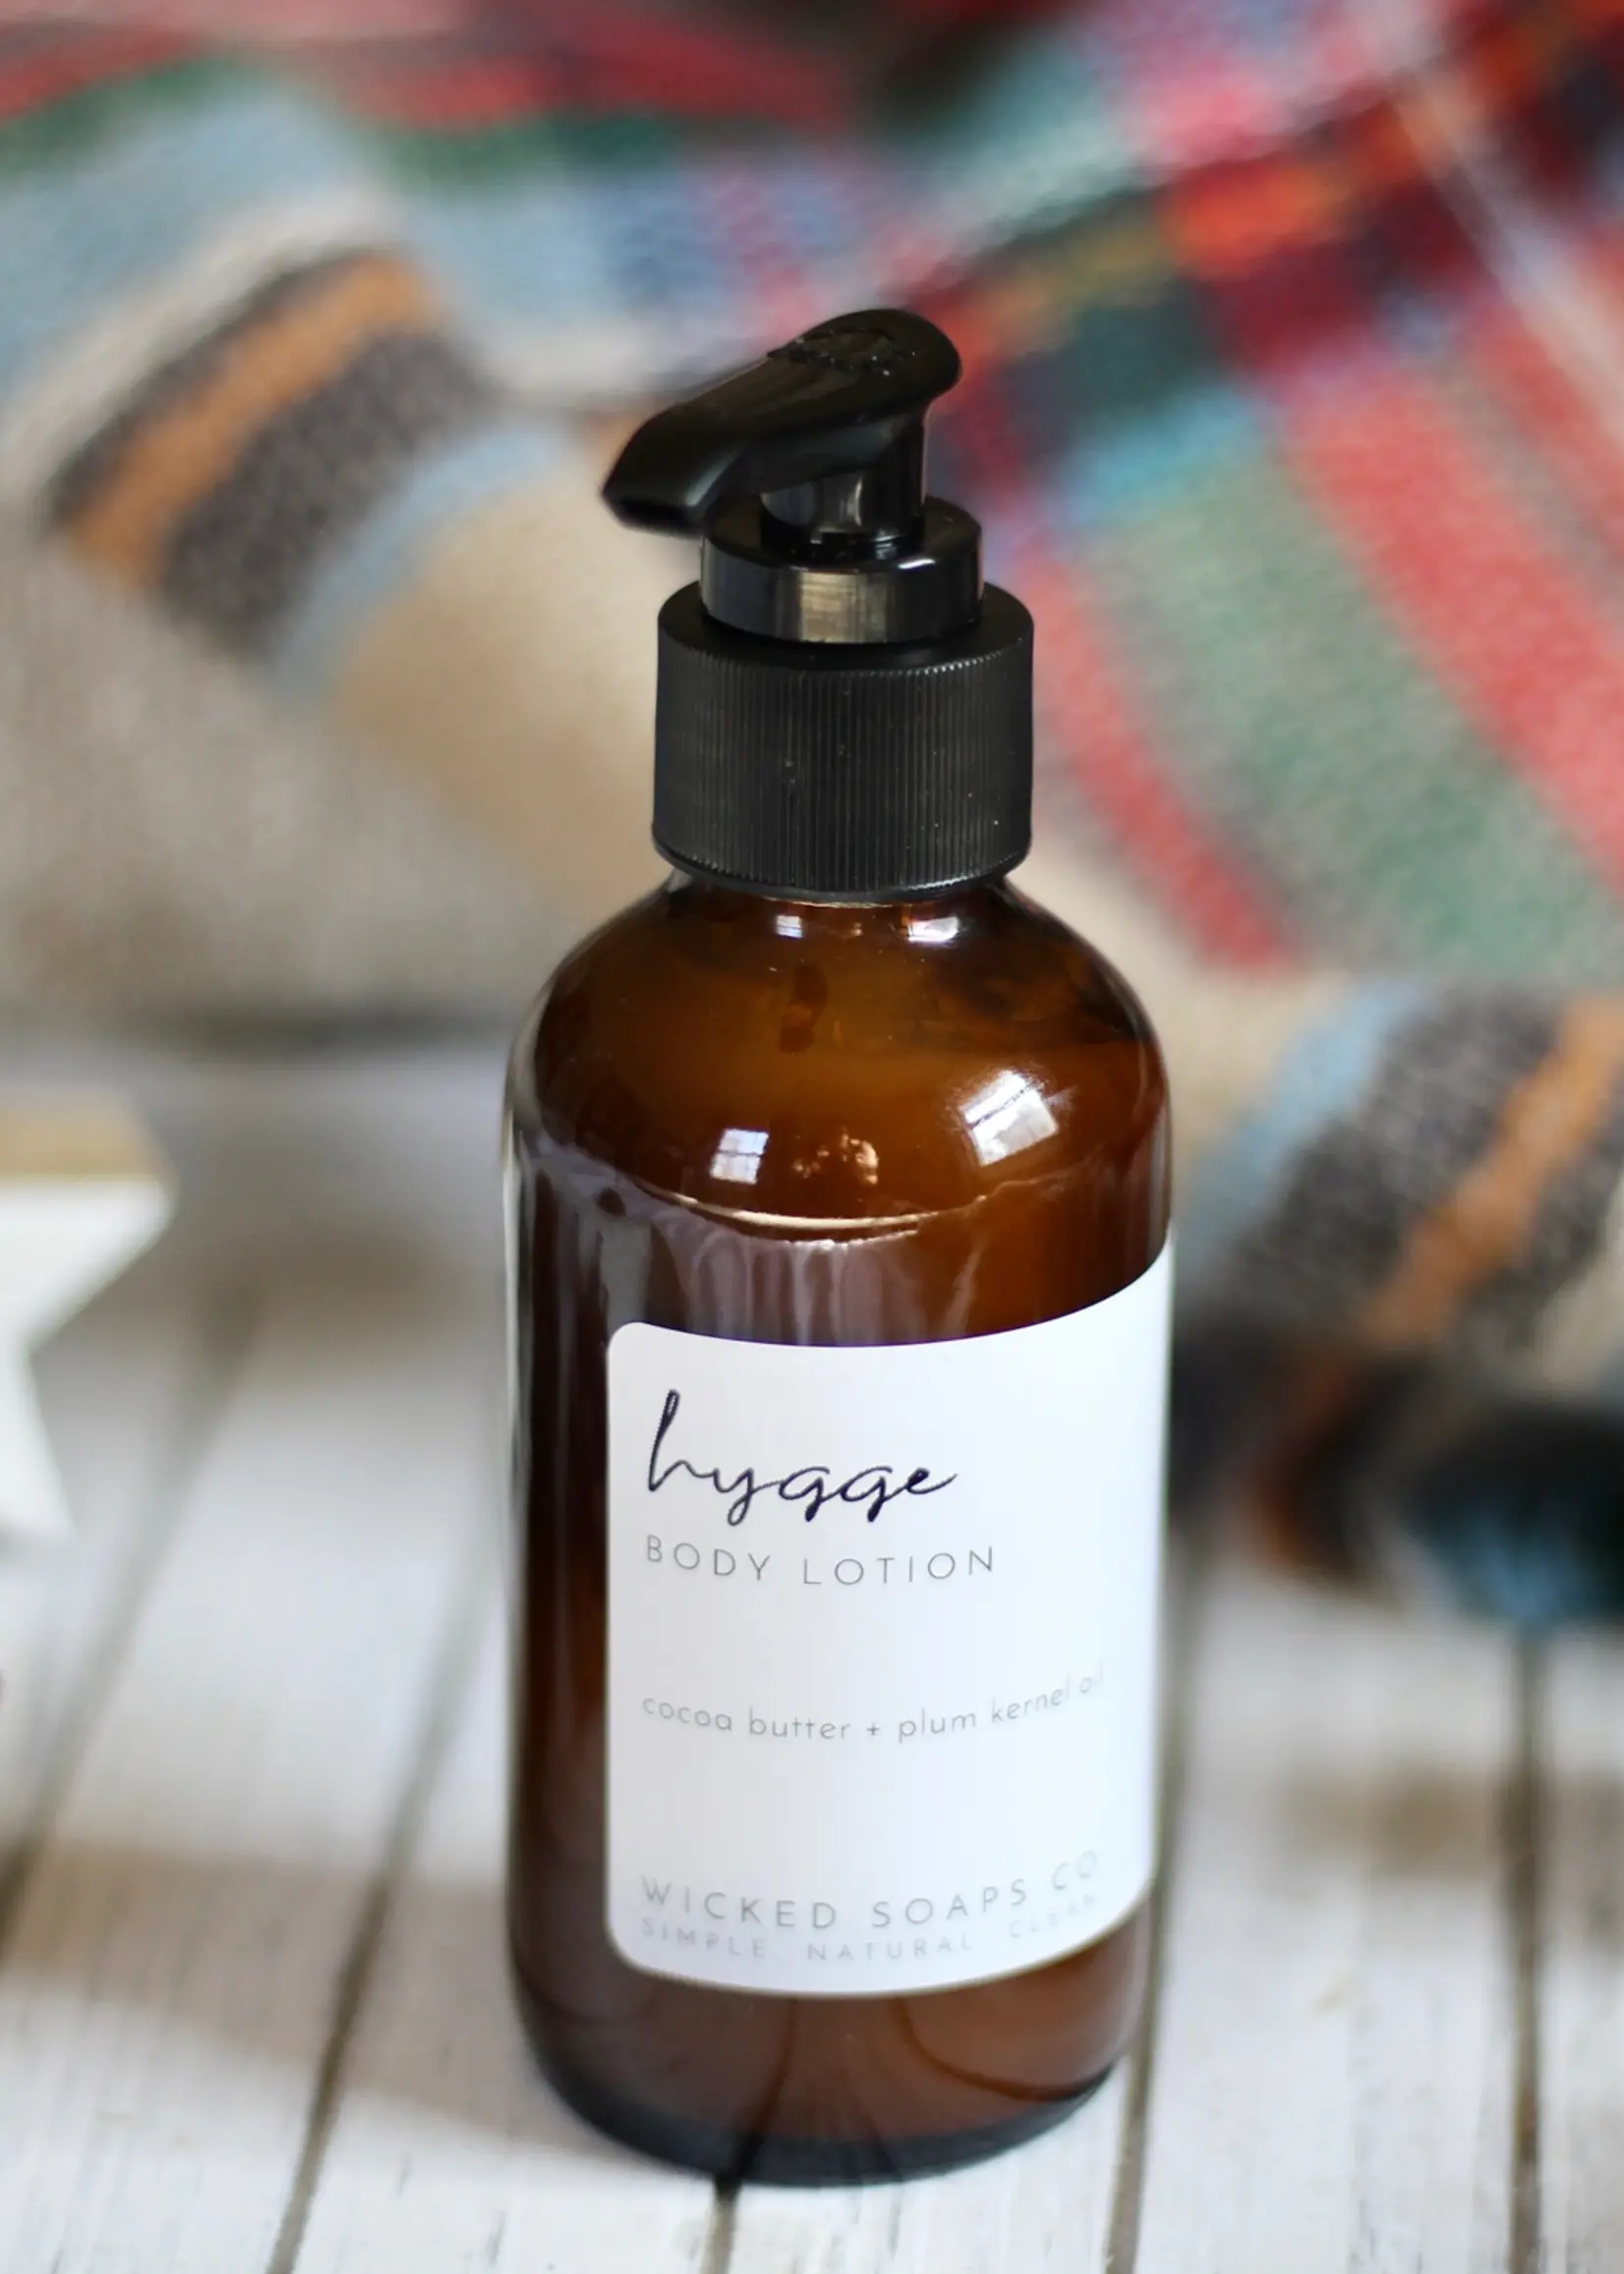 Wicked Soaps Co. Hygge Body Lotion